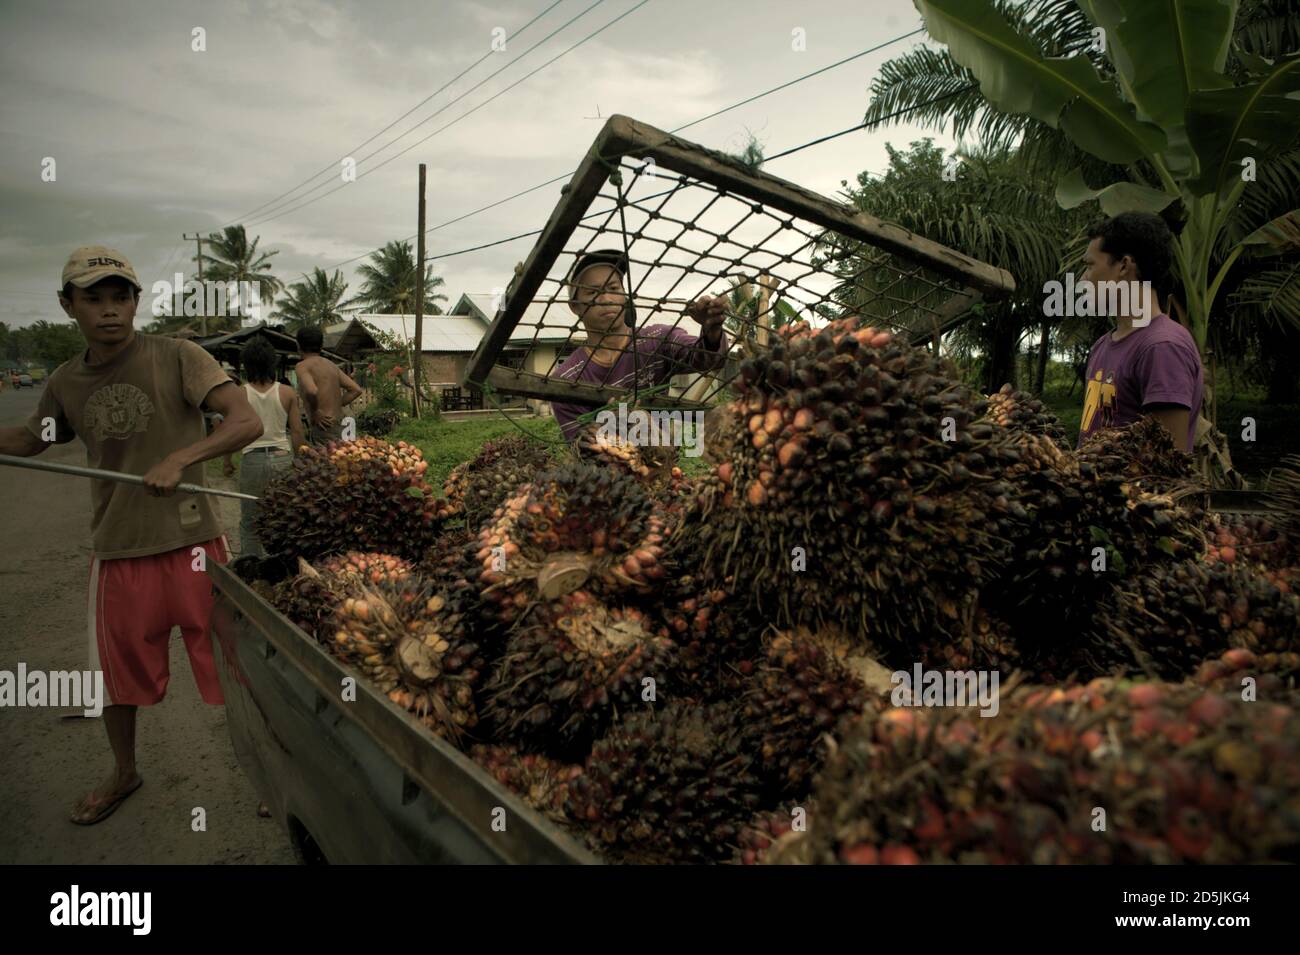 People loading freshly harvested oil palm fruits onto a pick-up truck on the side of a road in Bengkulu province, Sumatra, Indonesia. Stock Photo